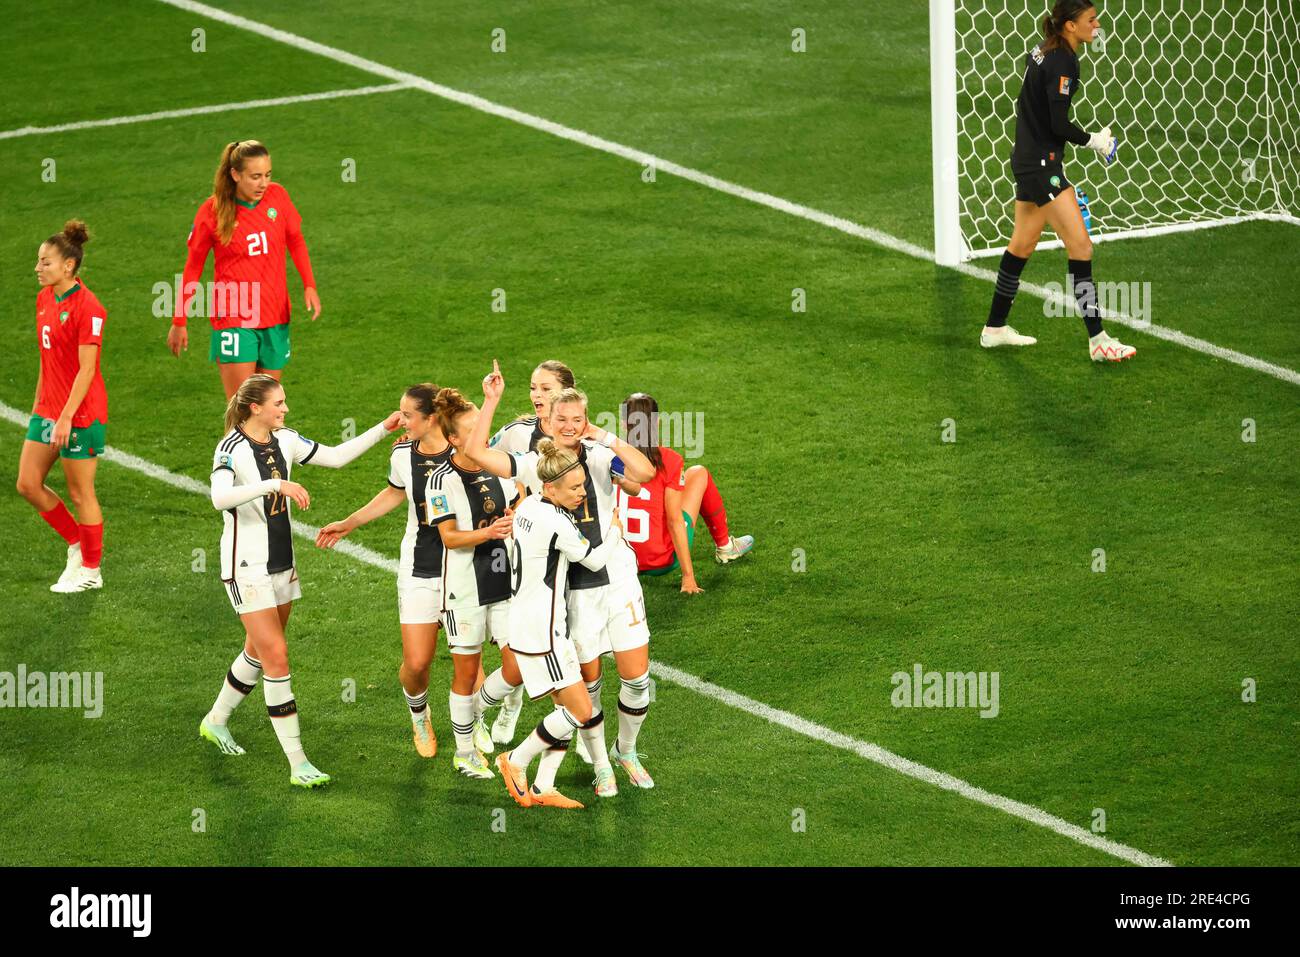 Melbourne, Australia. 24th July, 2023. Alexandra Popp-Hoppe of Germany celebrates with her team after scoring a goal during the FIFA Women's World Cup Australia & New Zealand 2023 Group match between Germany and Morocco at Melbourne Rectangular Stadium. Germany won the game 6-0. (Photo by George Hitchens/SOPA Images/Sipa USA) Credit: Sipa USA/Alamy Live News Stock Photo